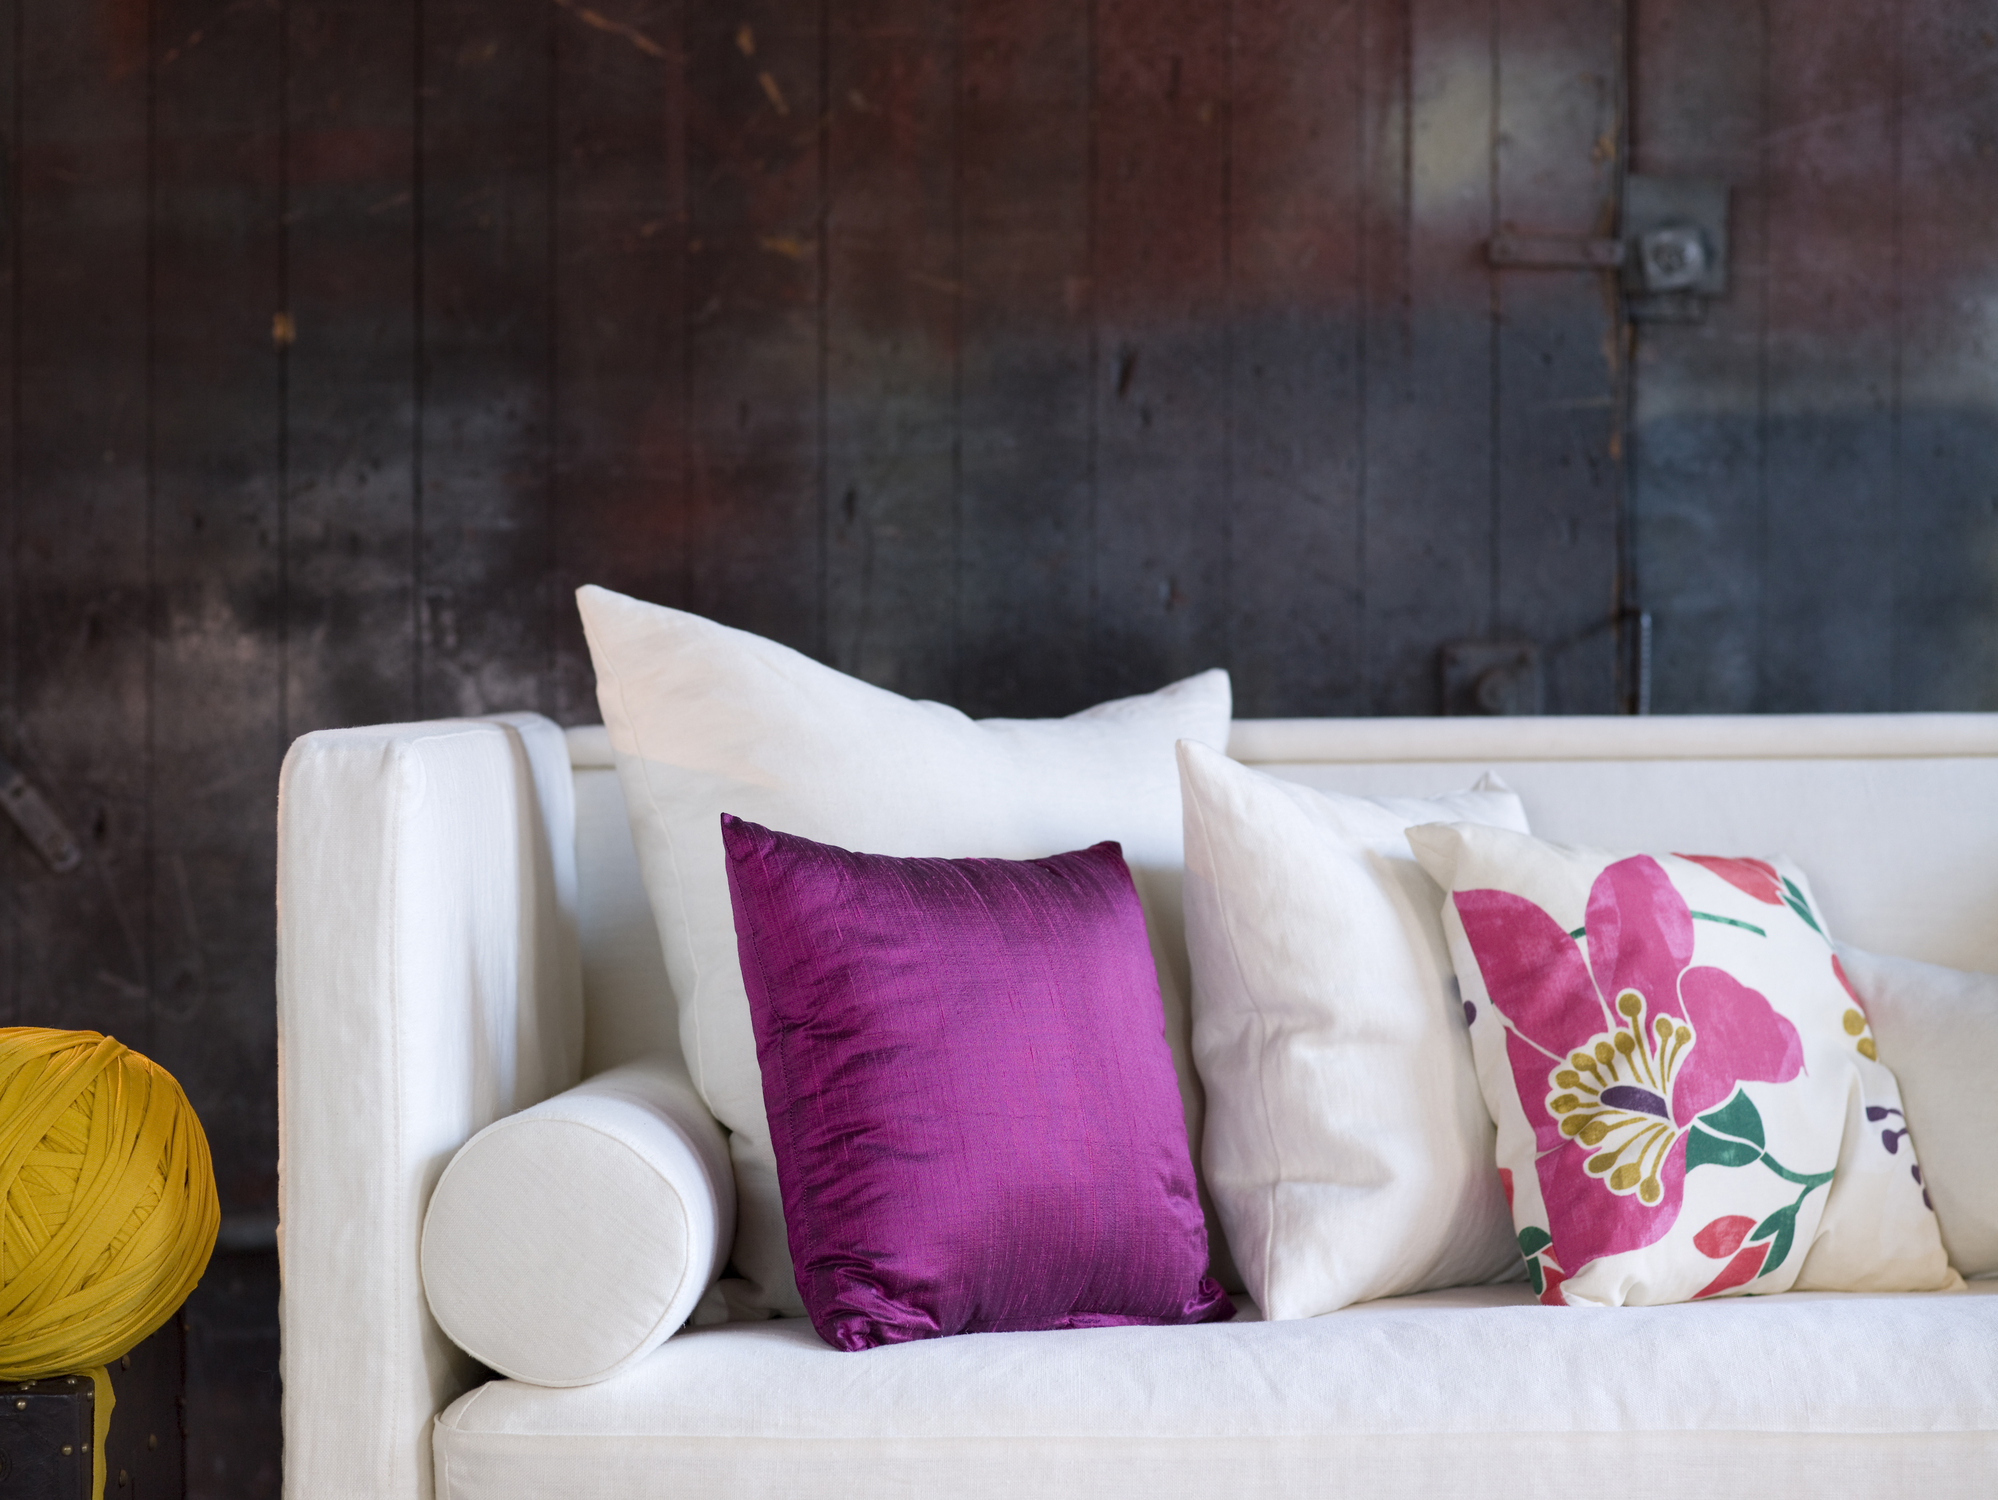 A white couch with mixed-style pillows against a distressed multicolored backdrop